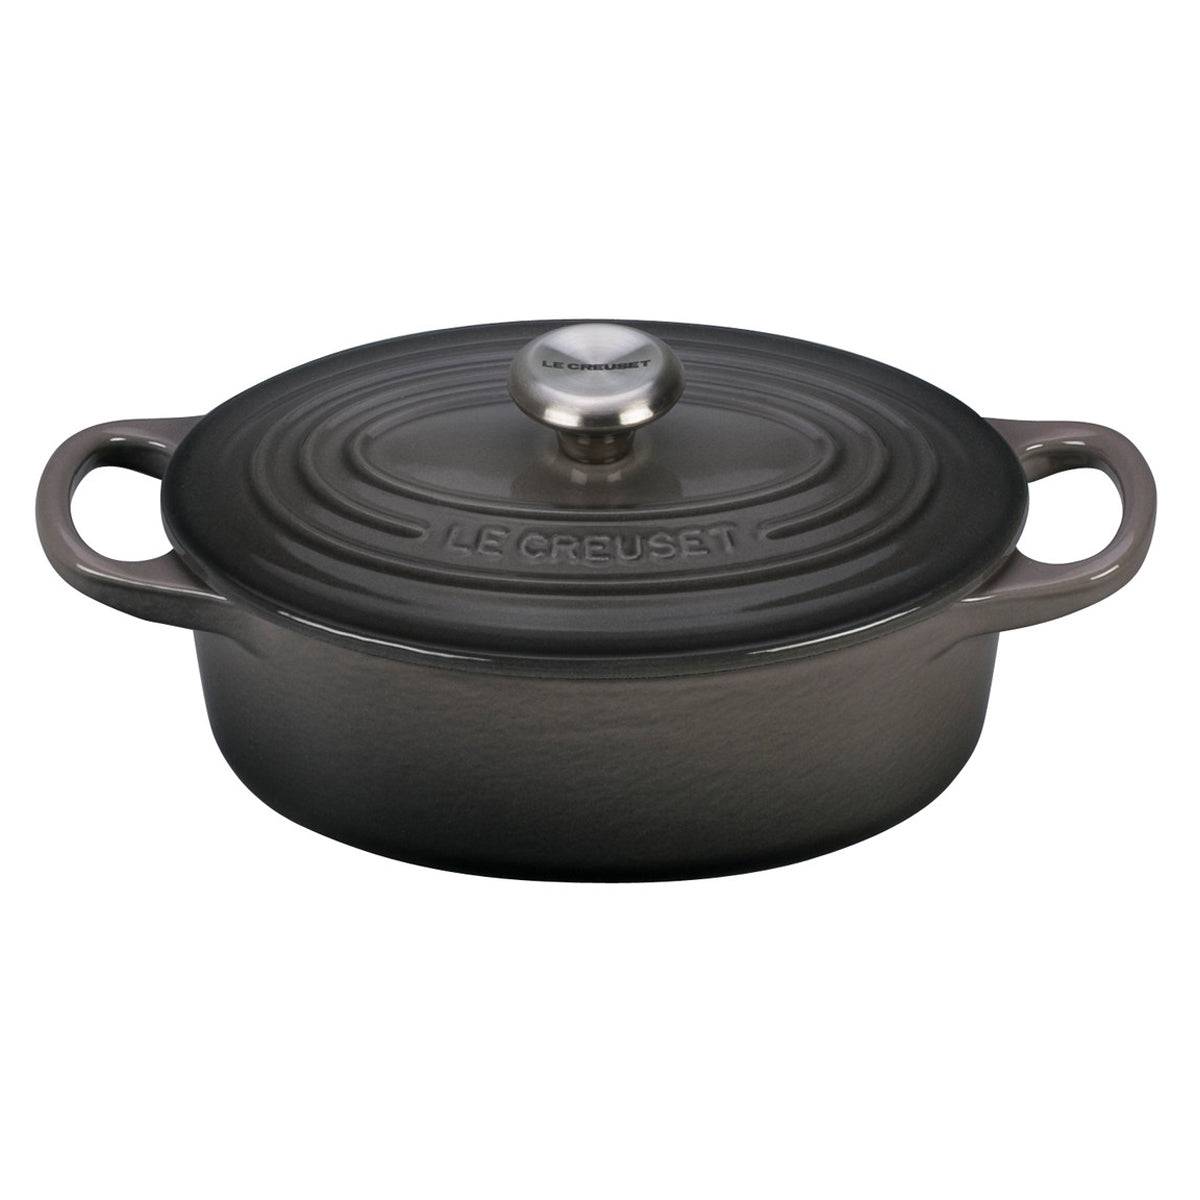 Le Creuset Signature Enameled Cast Iron Oval French / Dutch Oven, 2.75-Quart, Oyster - Kitchen Universe